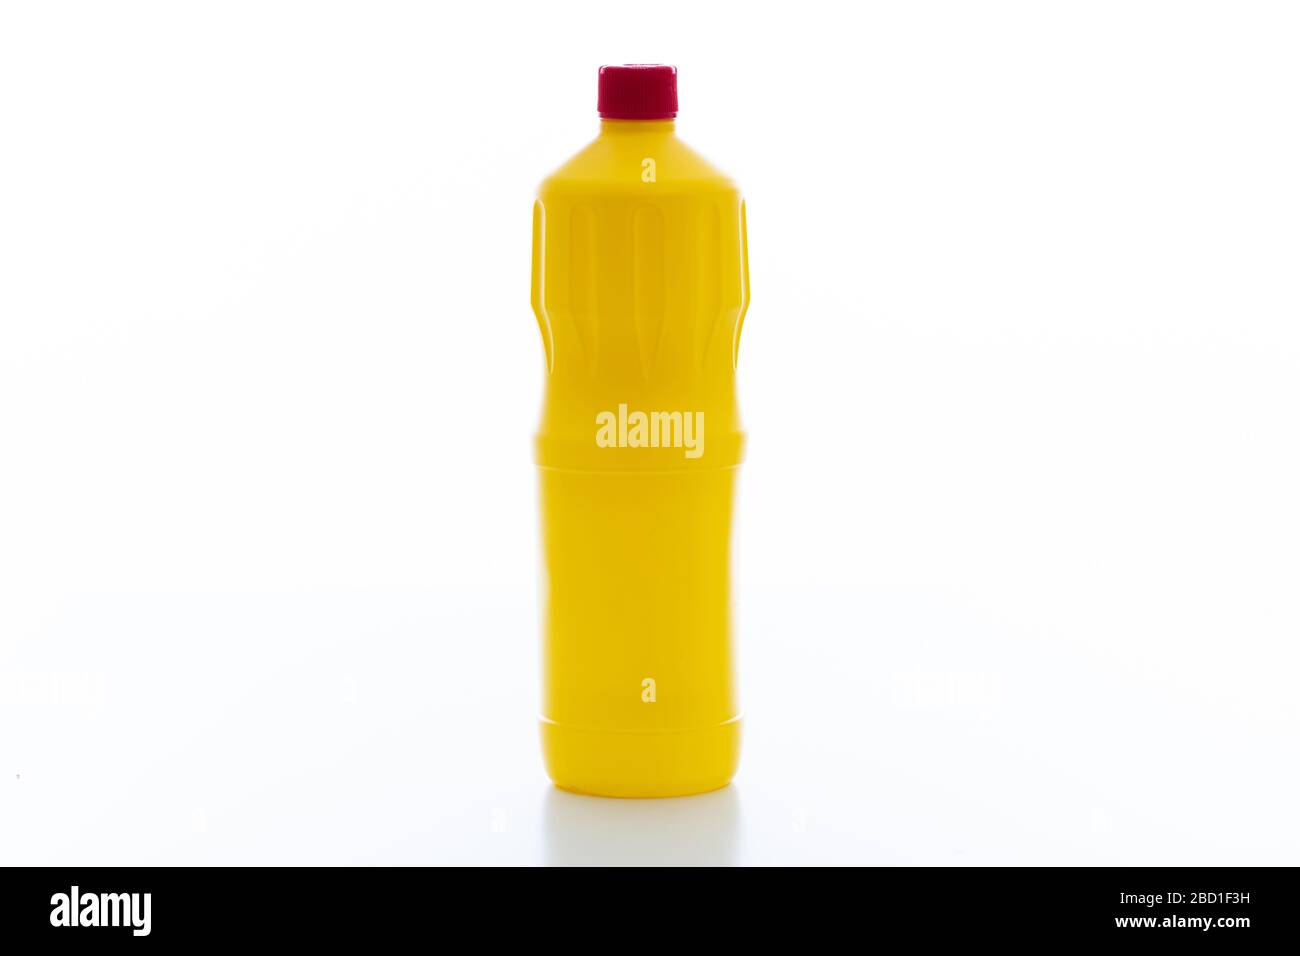 Cleaning chlorine bleach bottle yellow color with red lid isolated against white background. Chemical household product for laundry and disinfection, Stock Photo